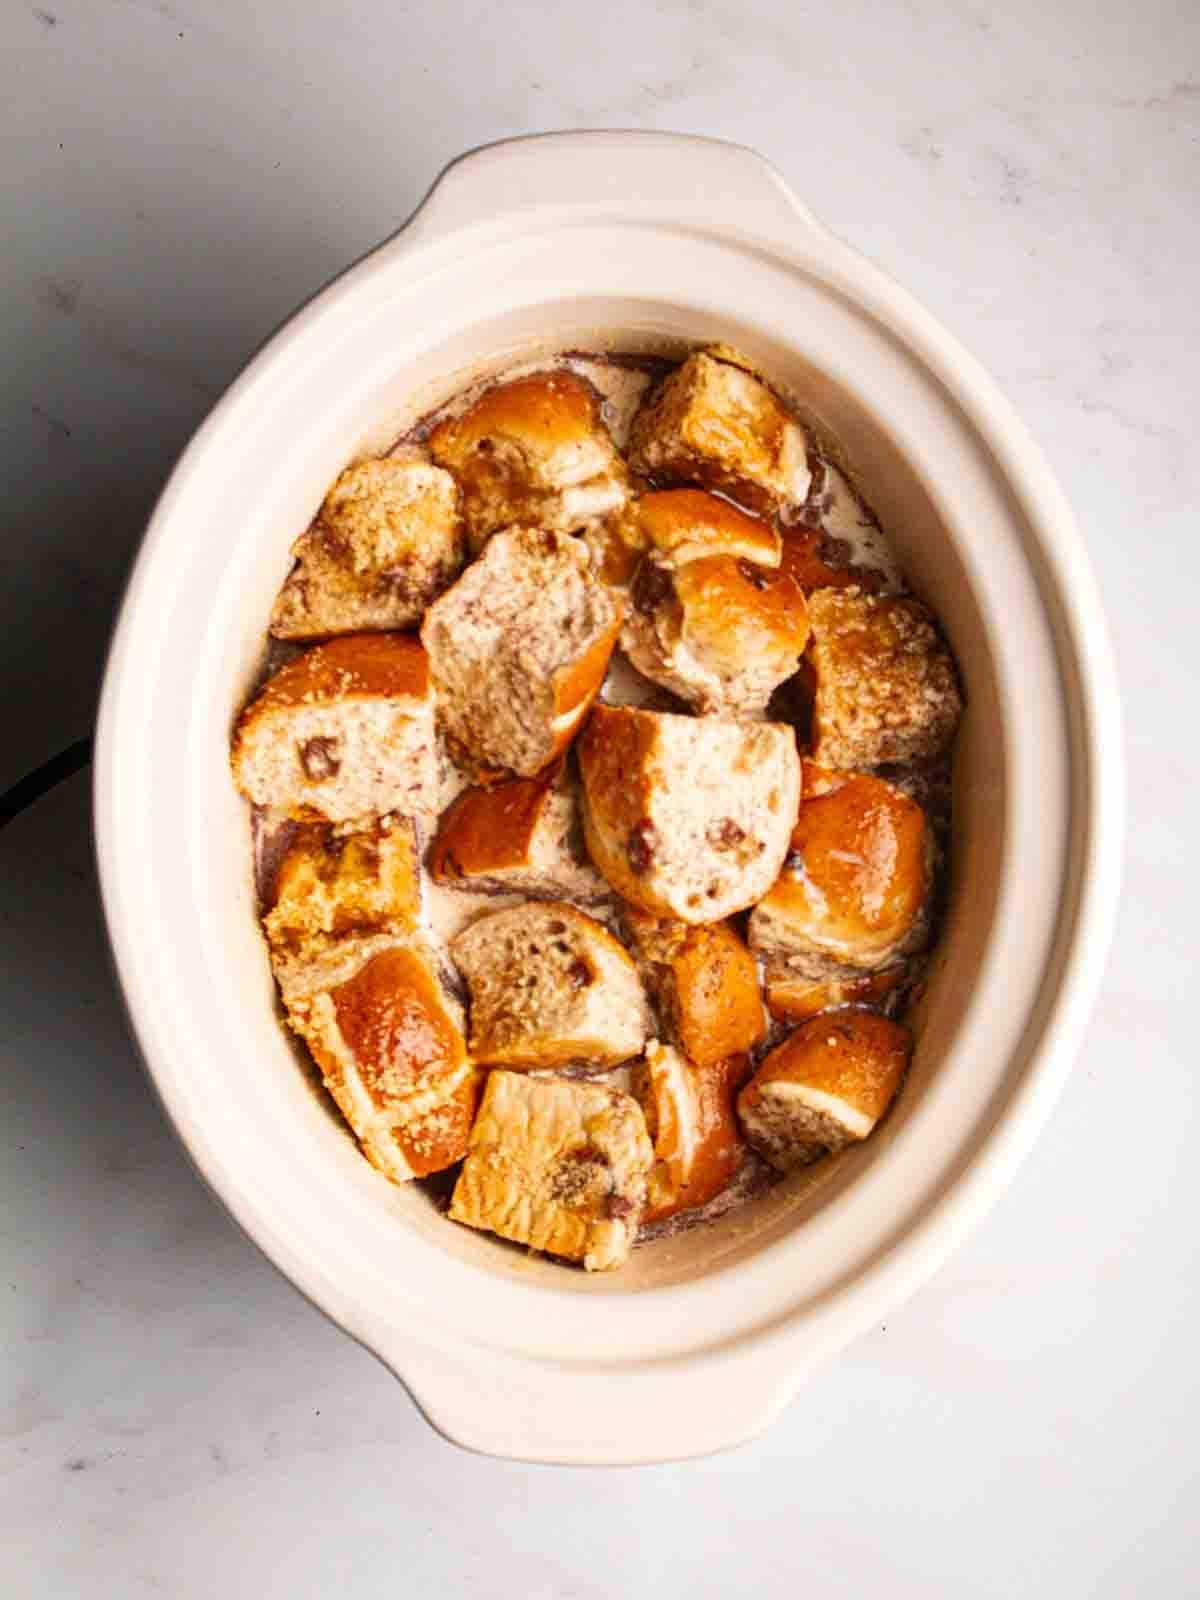 A slow cooker pan filled with hot cross buns and liquid for step 2 in the recipe for Hot Cross Bun Bread and Butter Pudding.